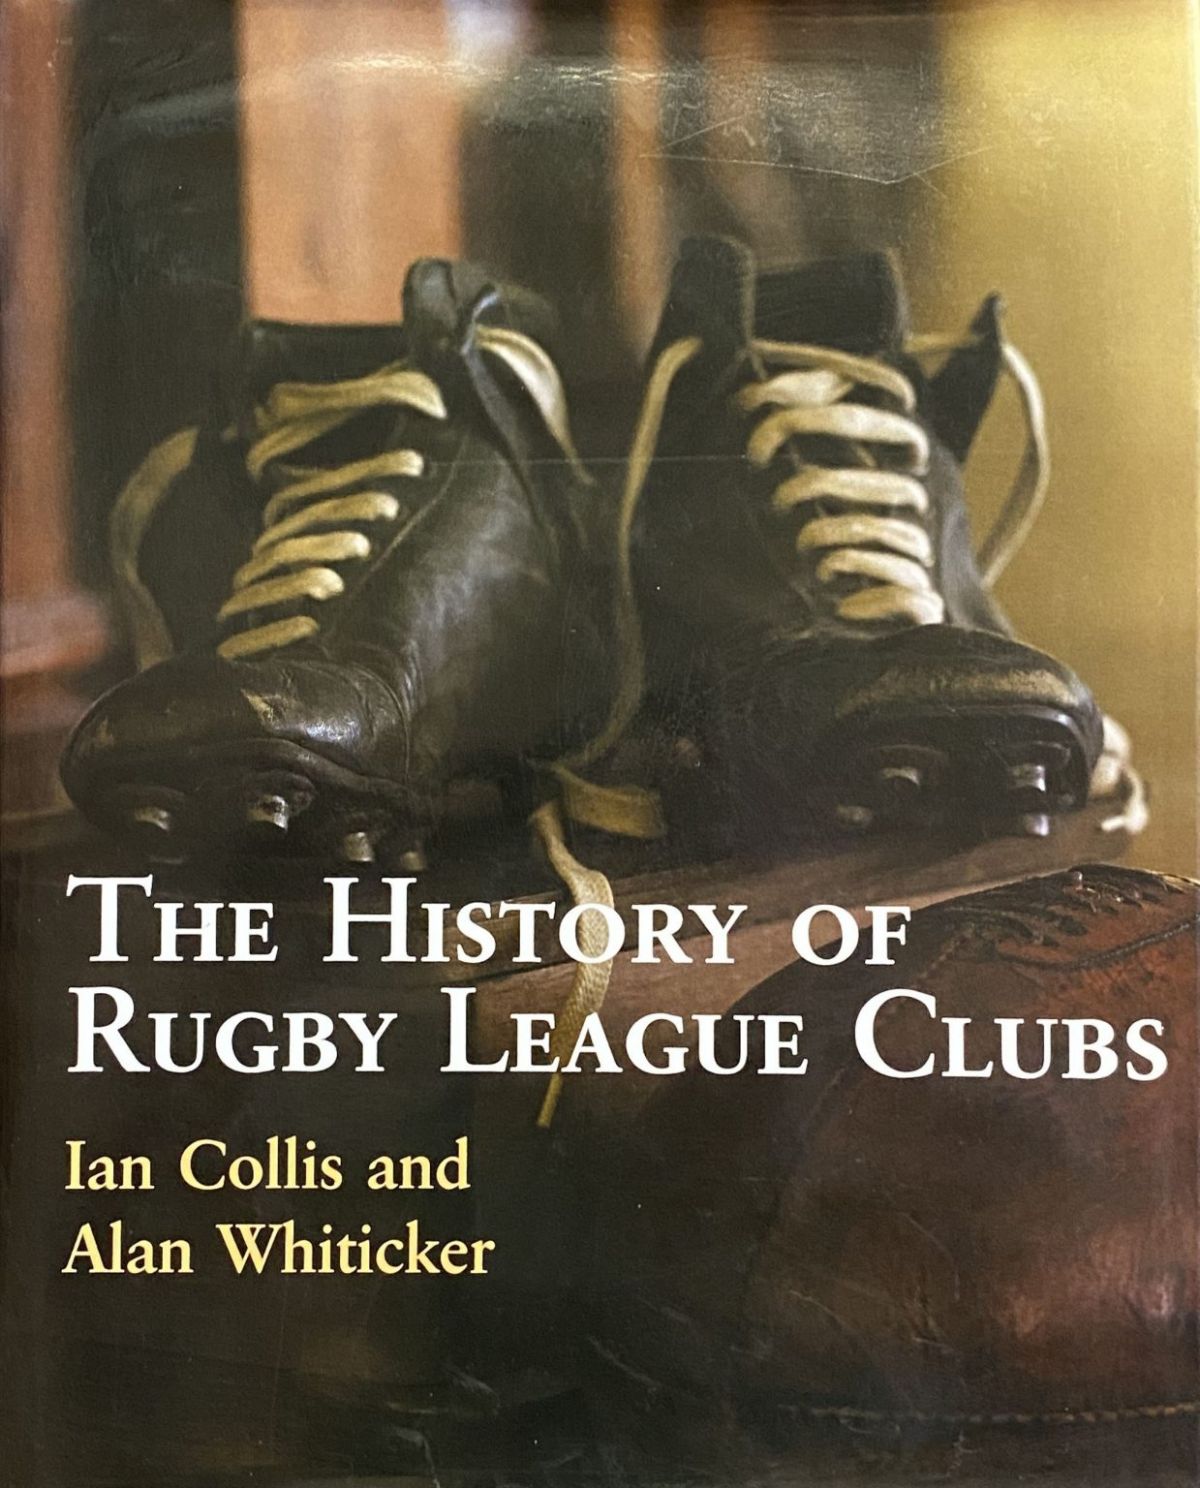 THE HISTORY OF RUGBY LEAGUE CLUBS